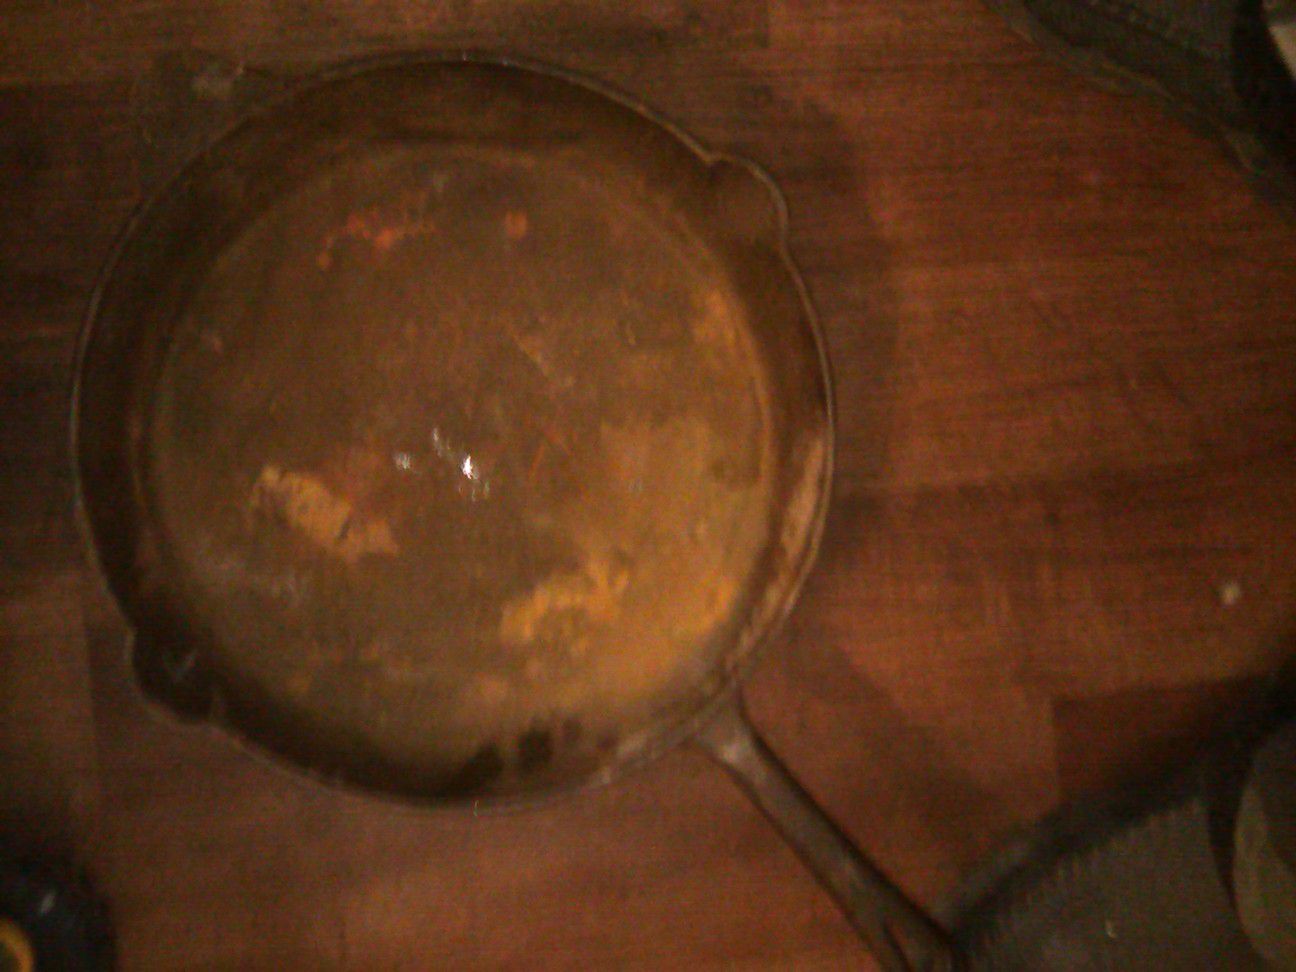 Antique cast iron skillet no name or marking's $40.00